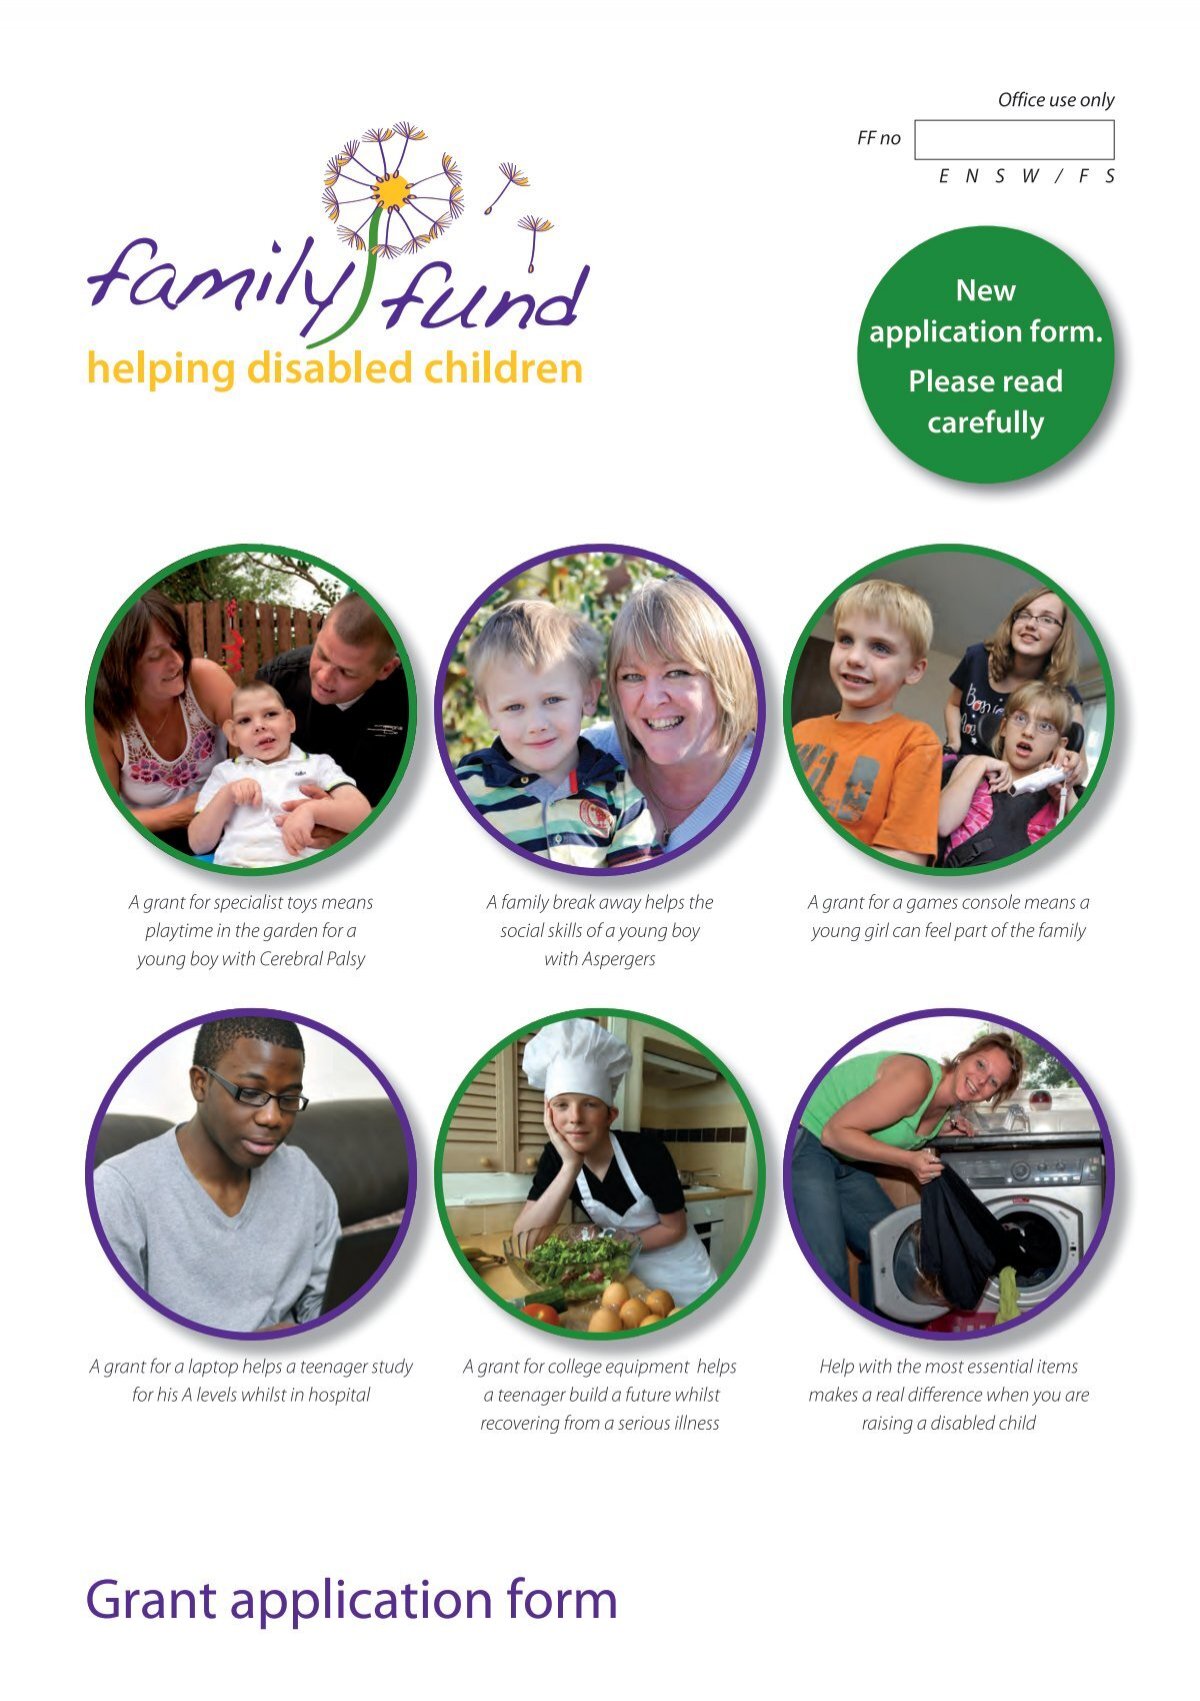 grant-application-form-family-fund